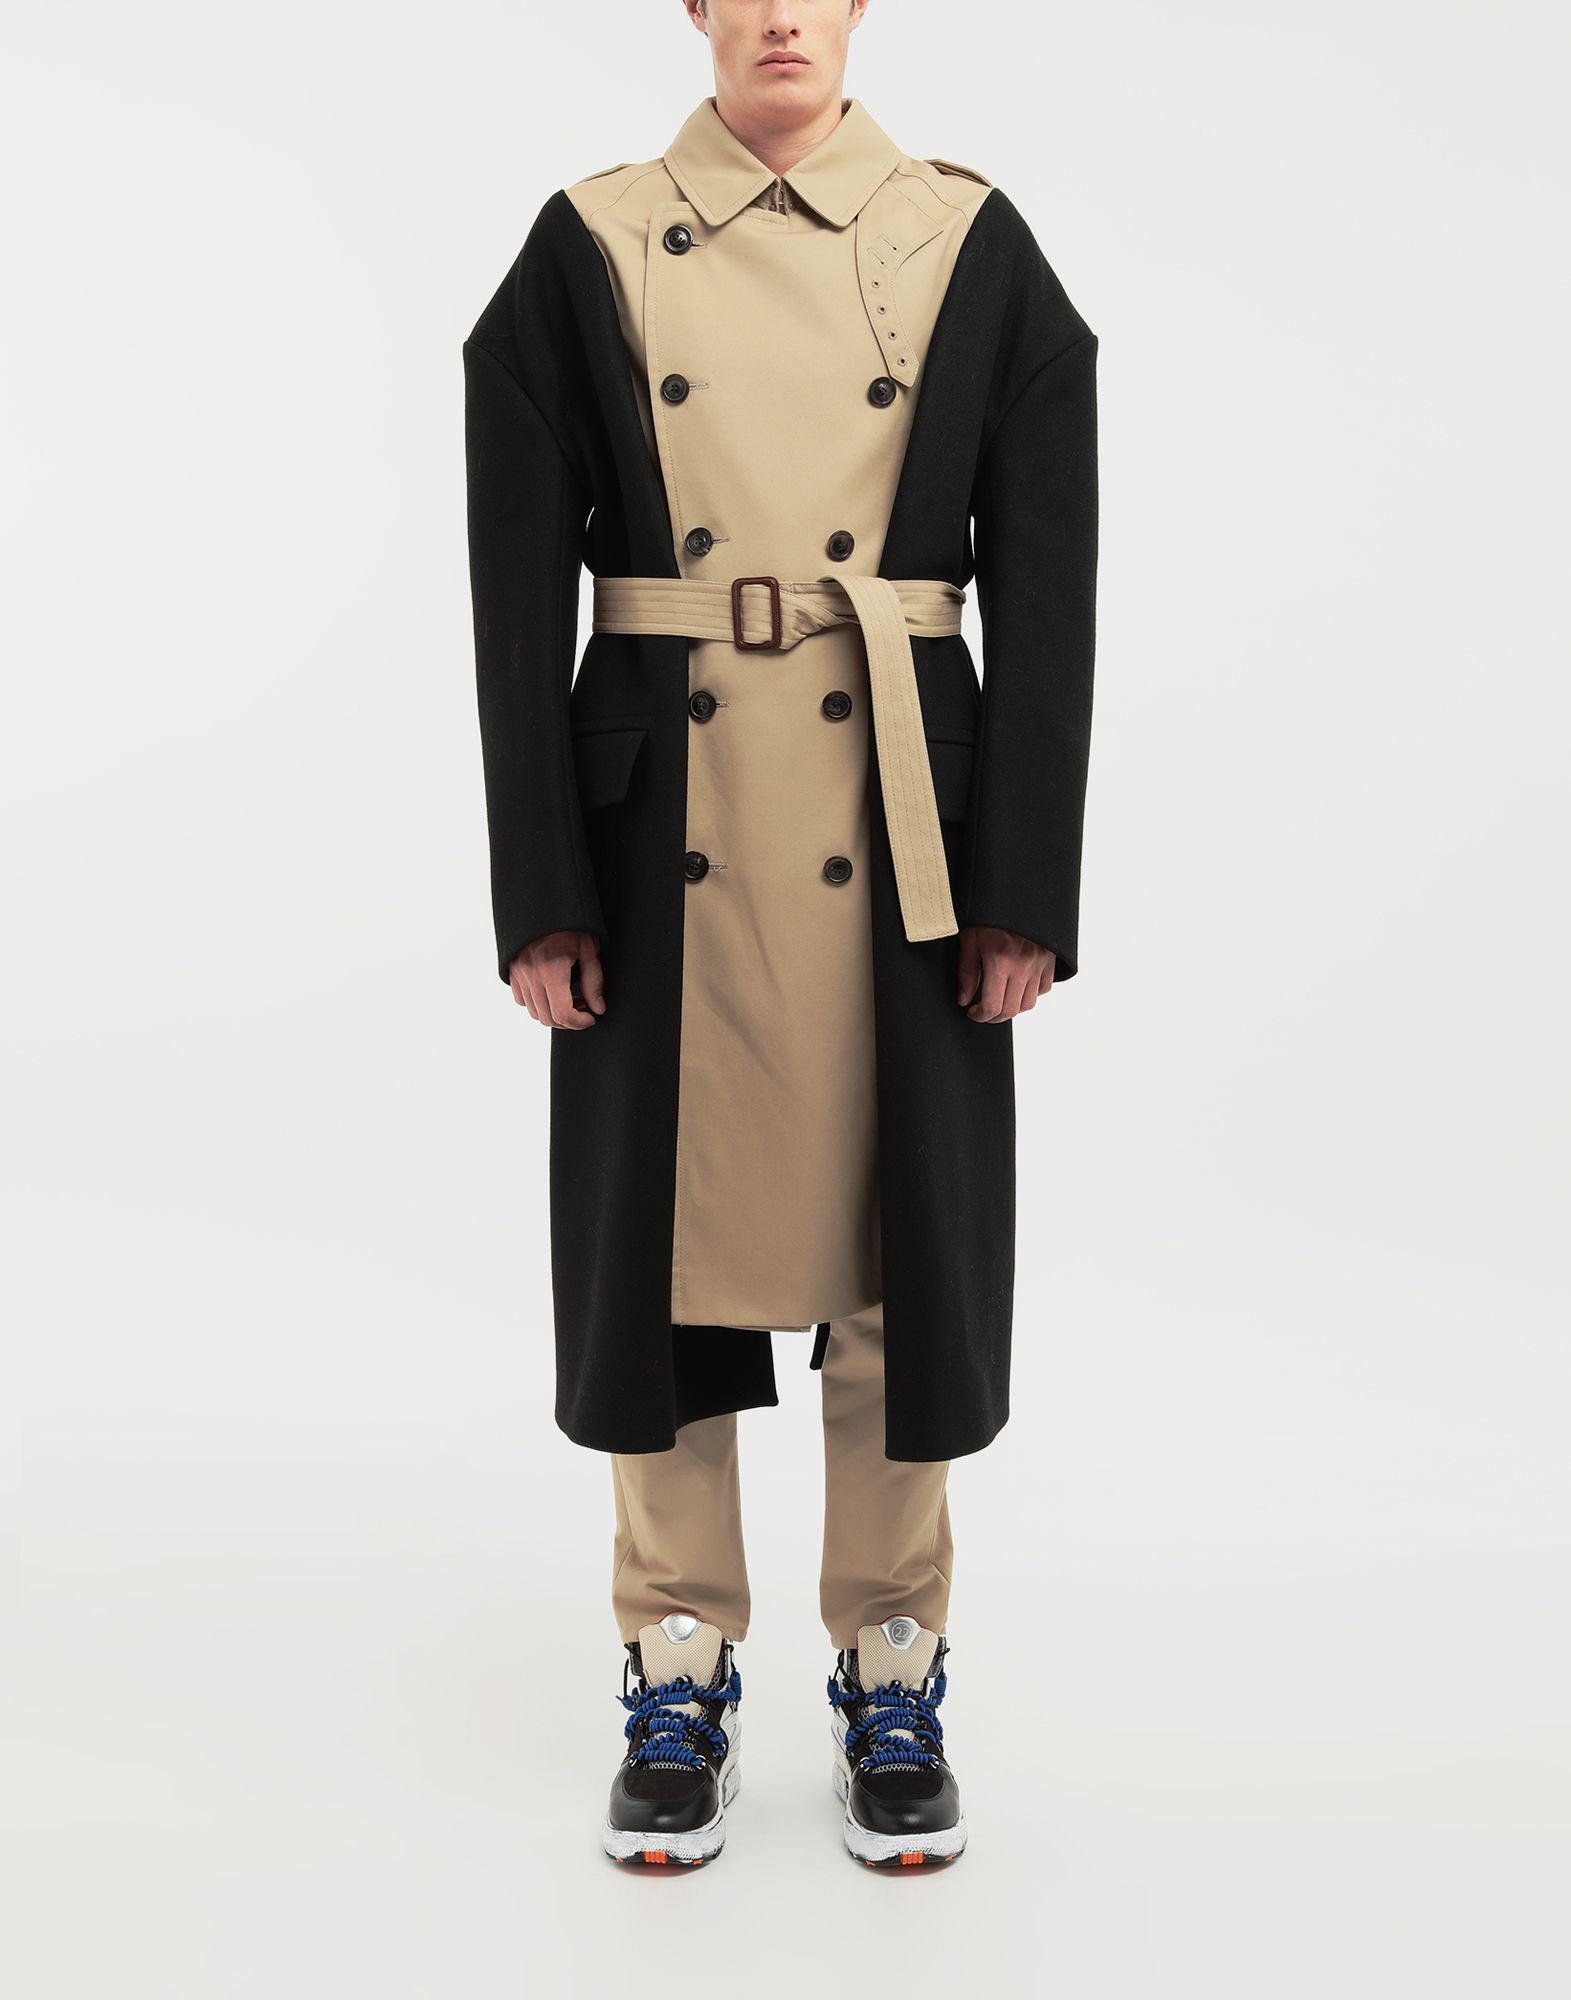 Maison Margiela Synthetic Two-tone Trench Coat in Black for Men - Lyst